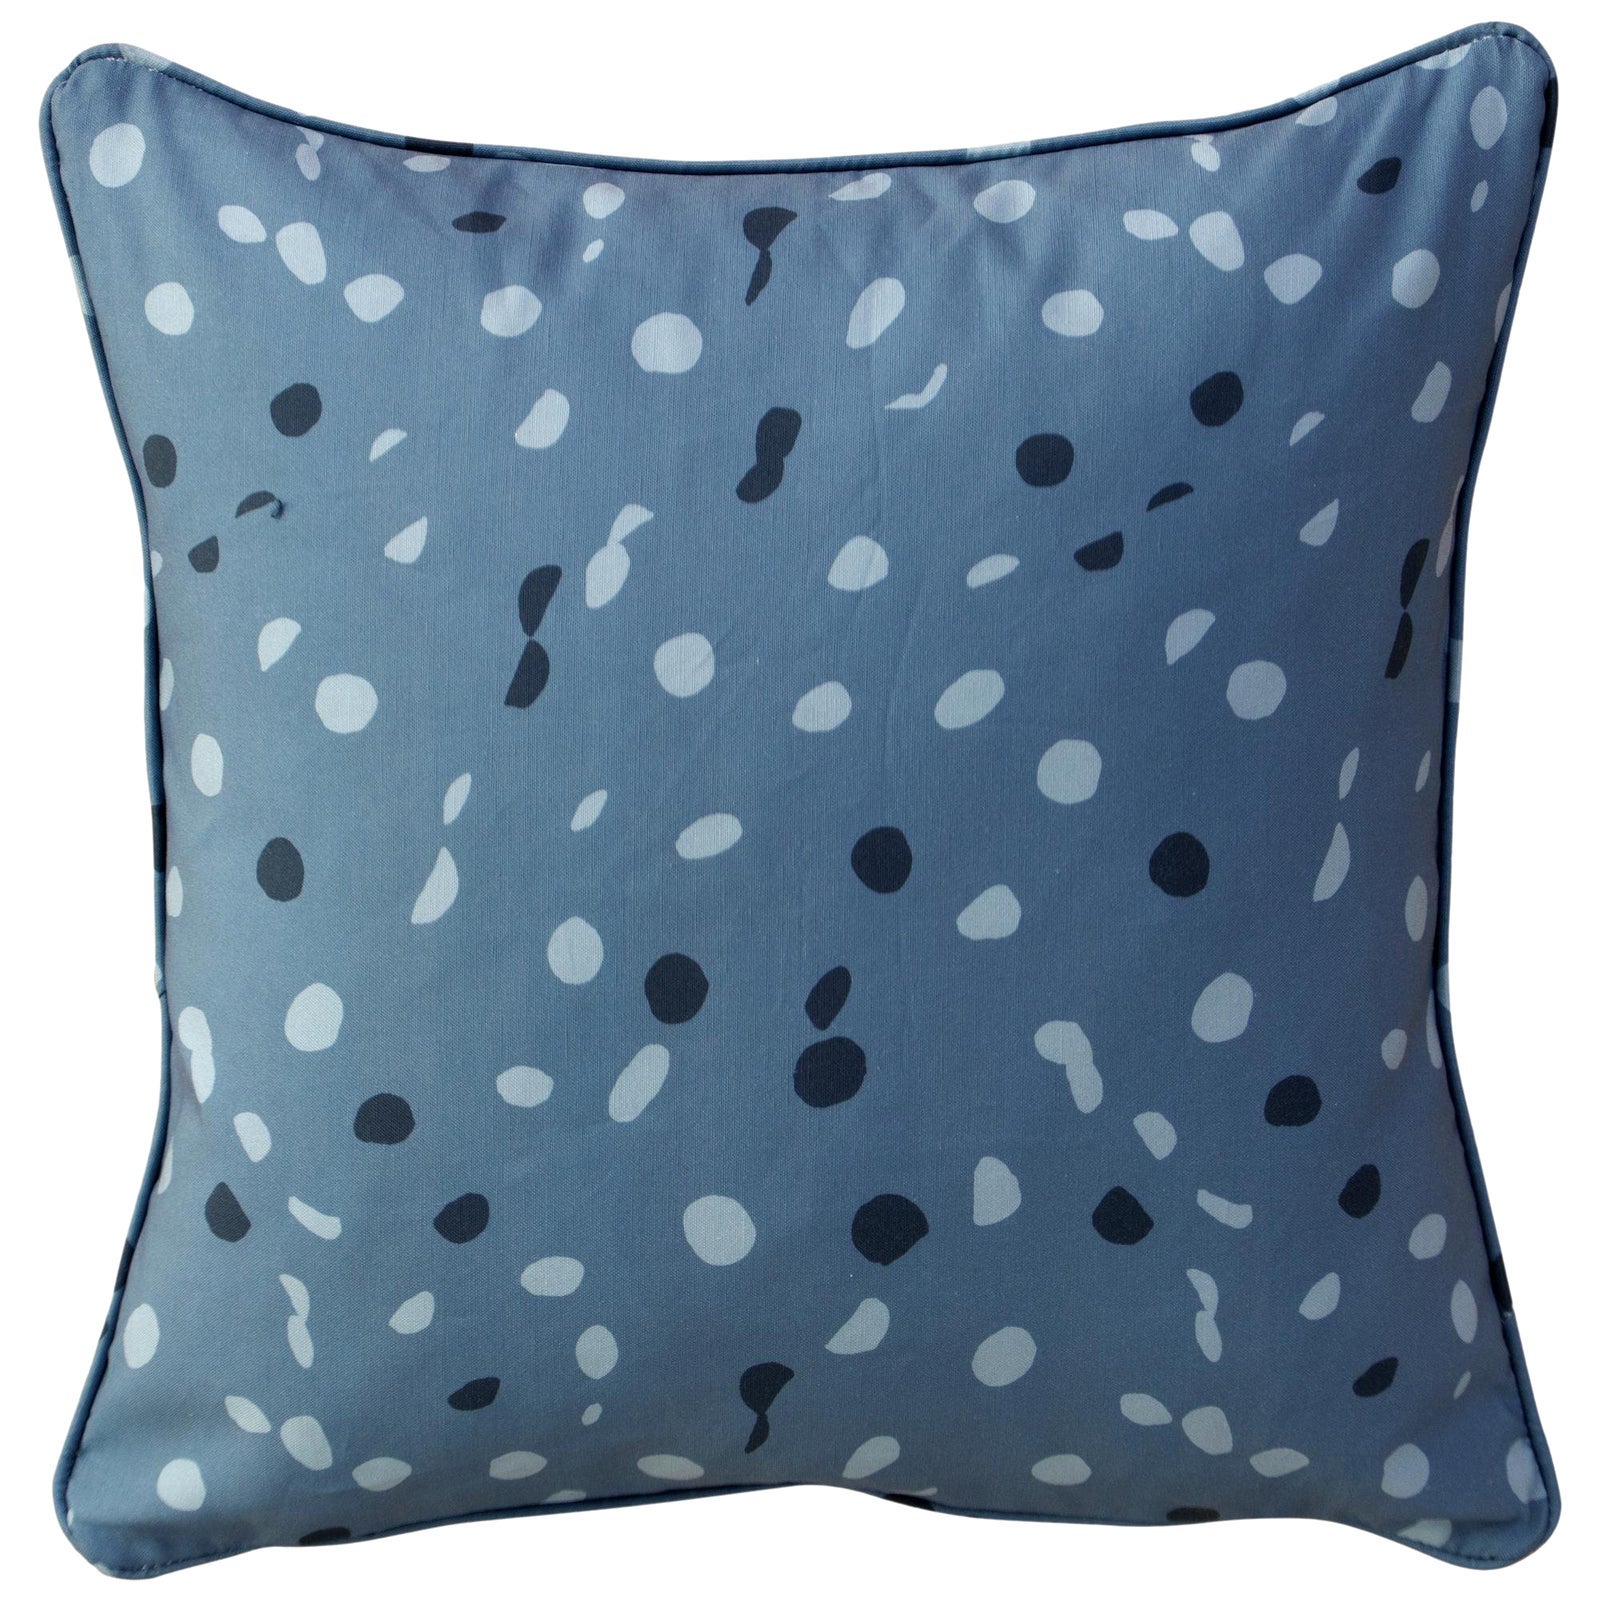 pillow-in-blue-dot-by-angela-chrusciaki-blehm-for-chairish-7828